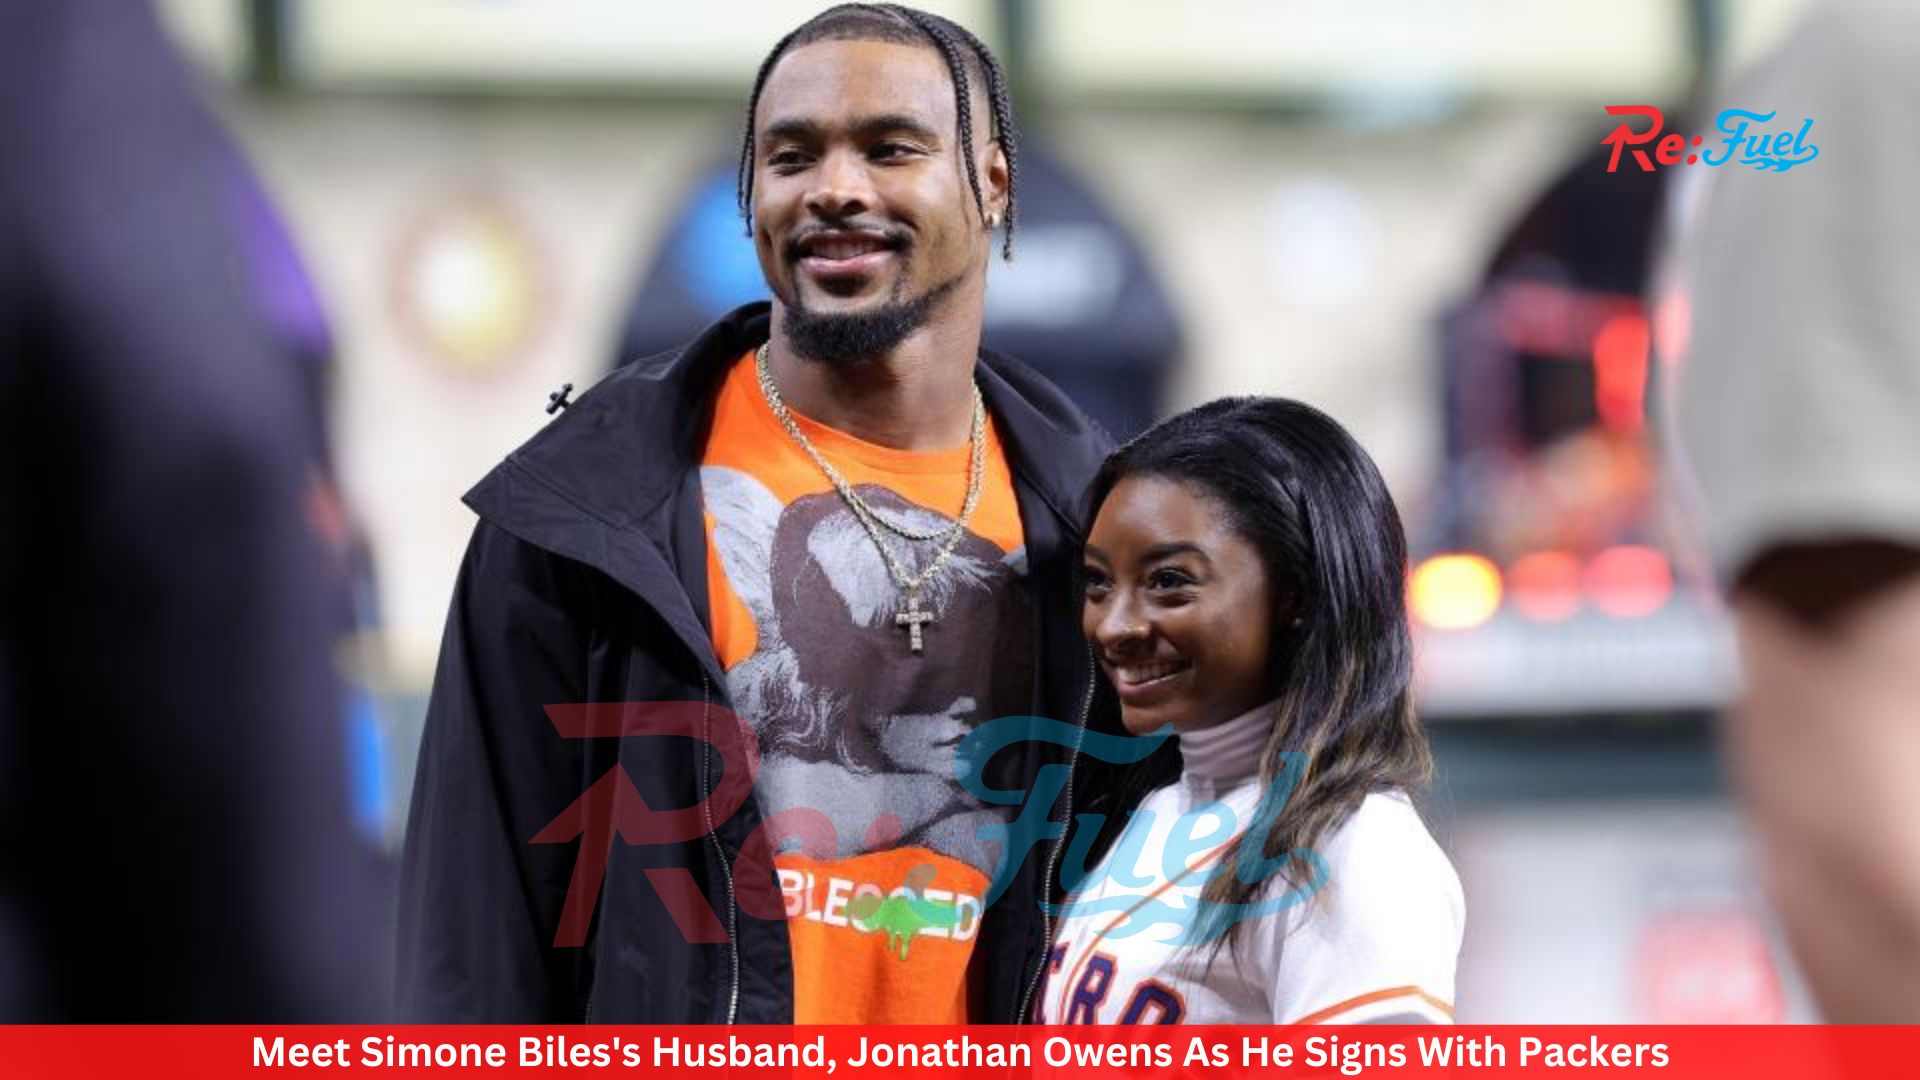 Meet Simone Biles's Husband, Jonathan Owens As He Signs With Packers